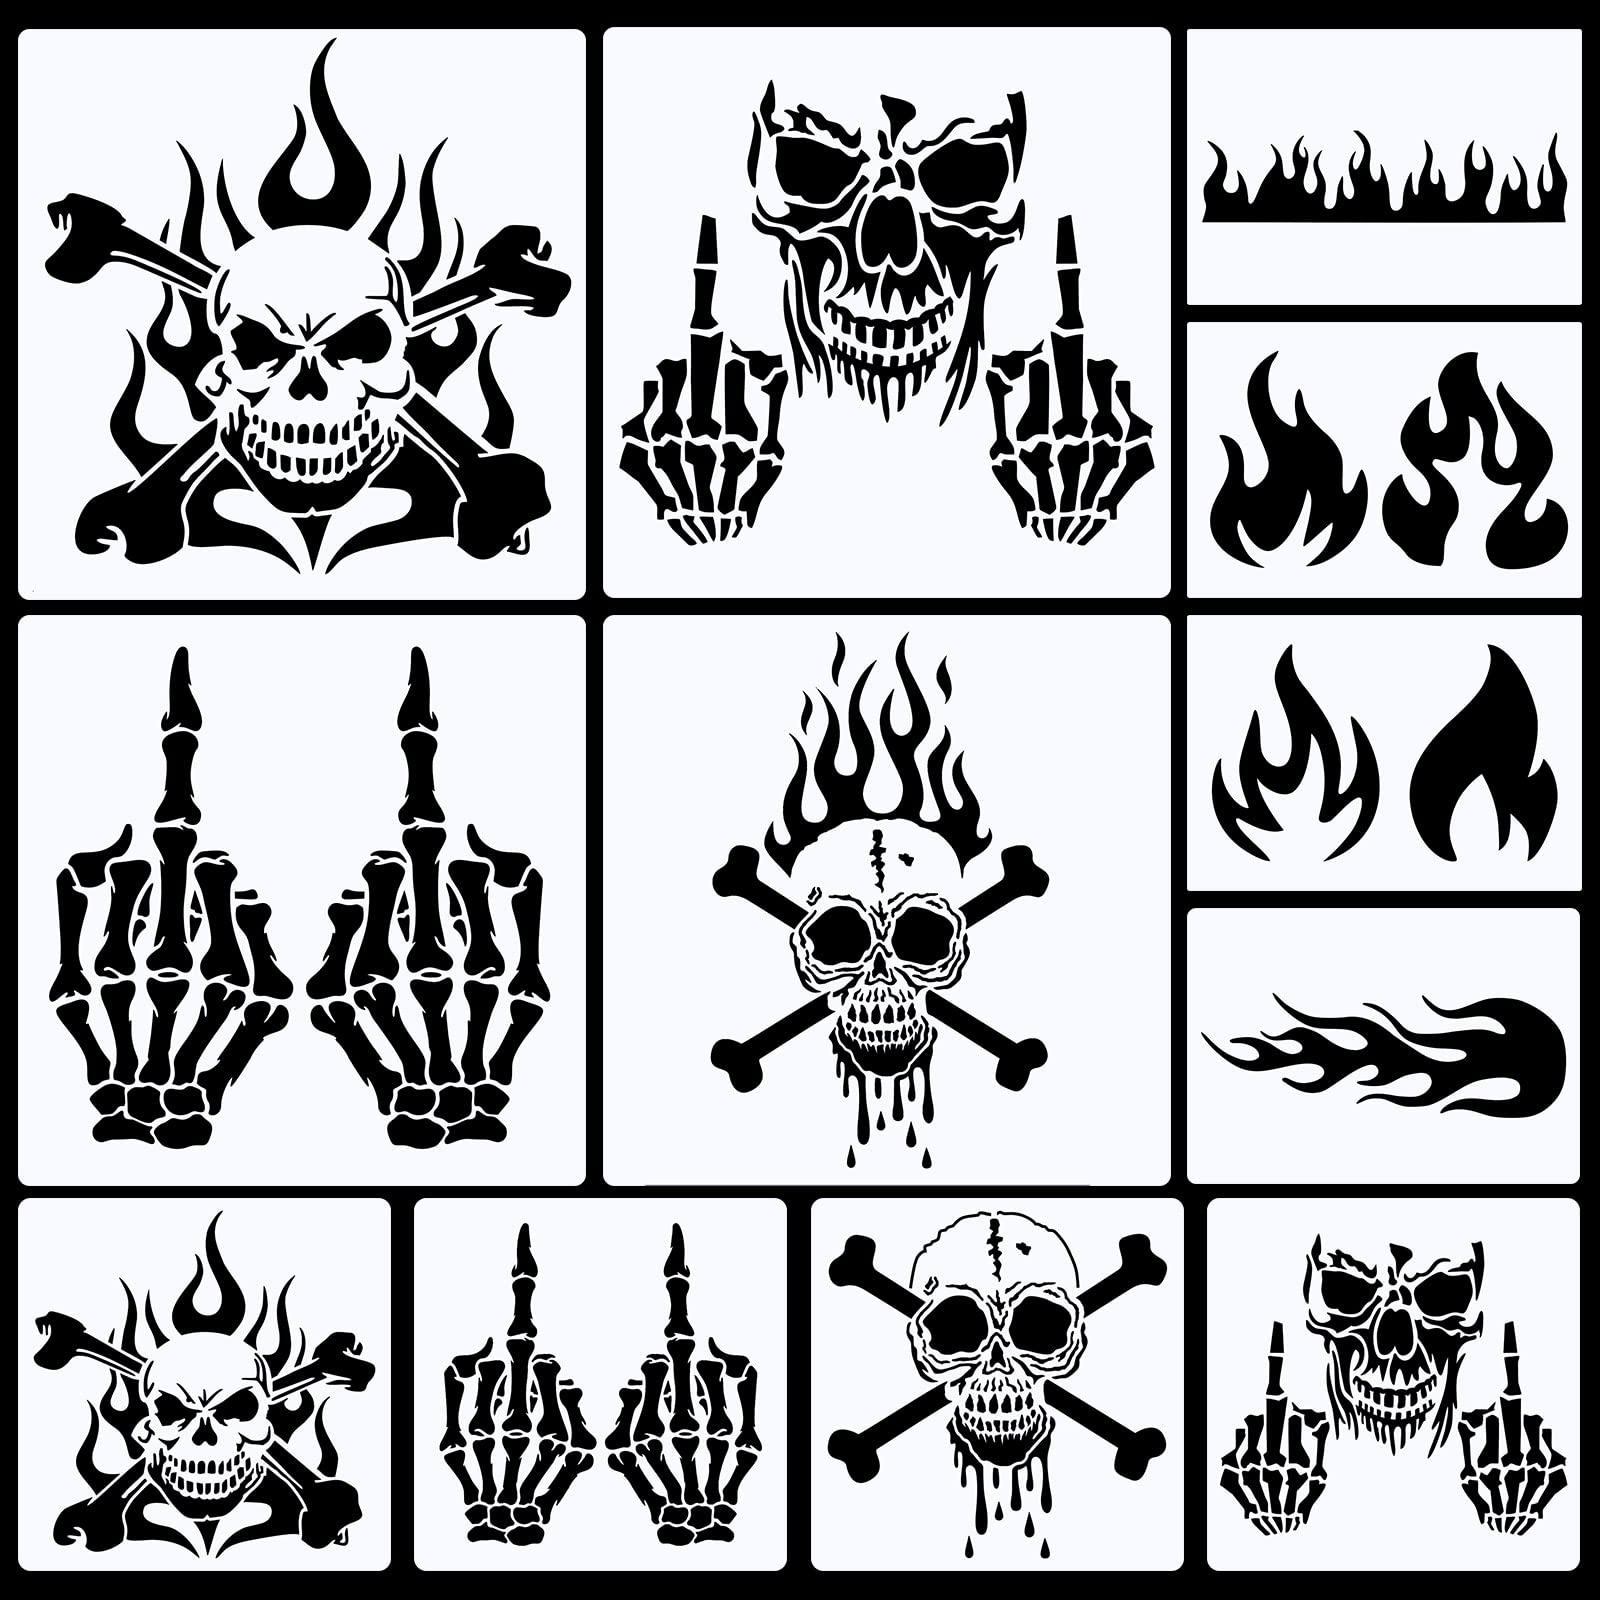 Amazon 12 Pcs Skull Stencil Flame Stencil Fire Skull Stencils For Airbrushing Reusable Airbrush Flame Template Flame Painting Decor Laser Cut Reusable Templates For Auto Motorcycle Cloth Scary Style Arts 